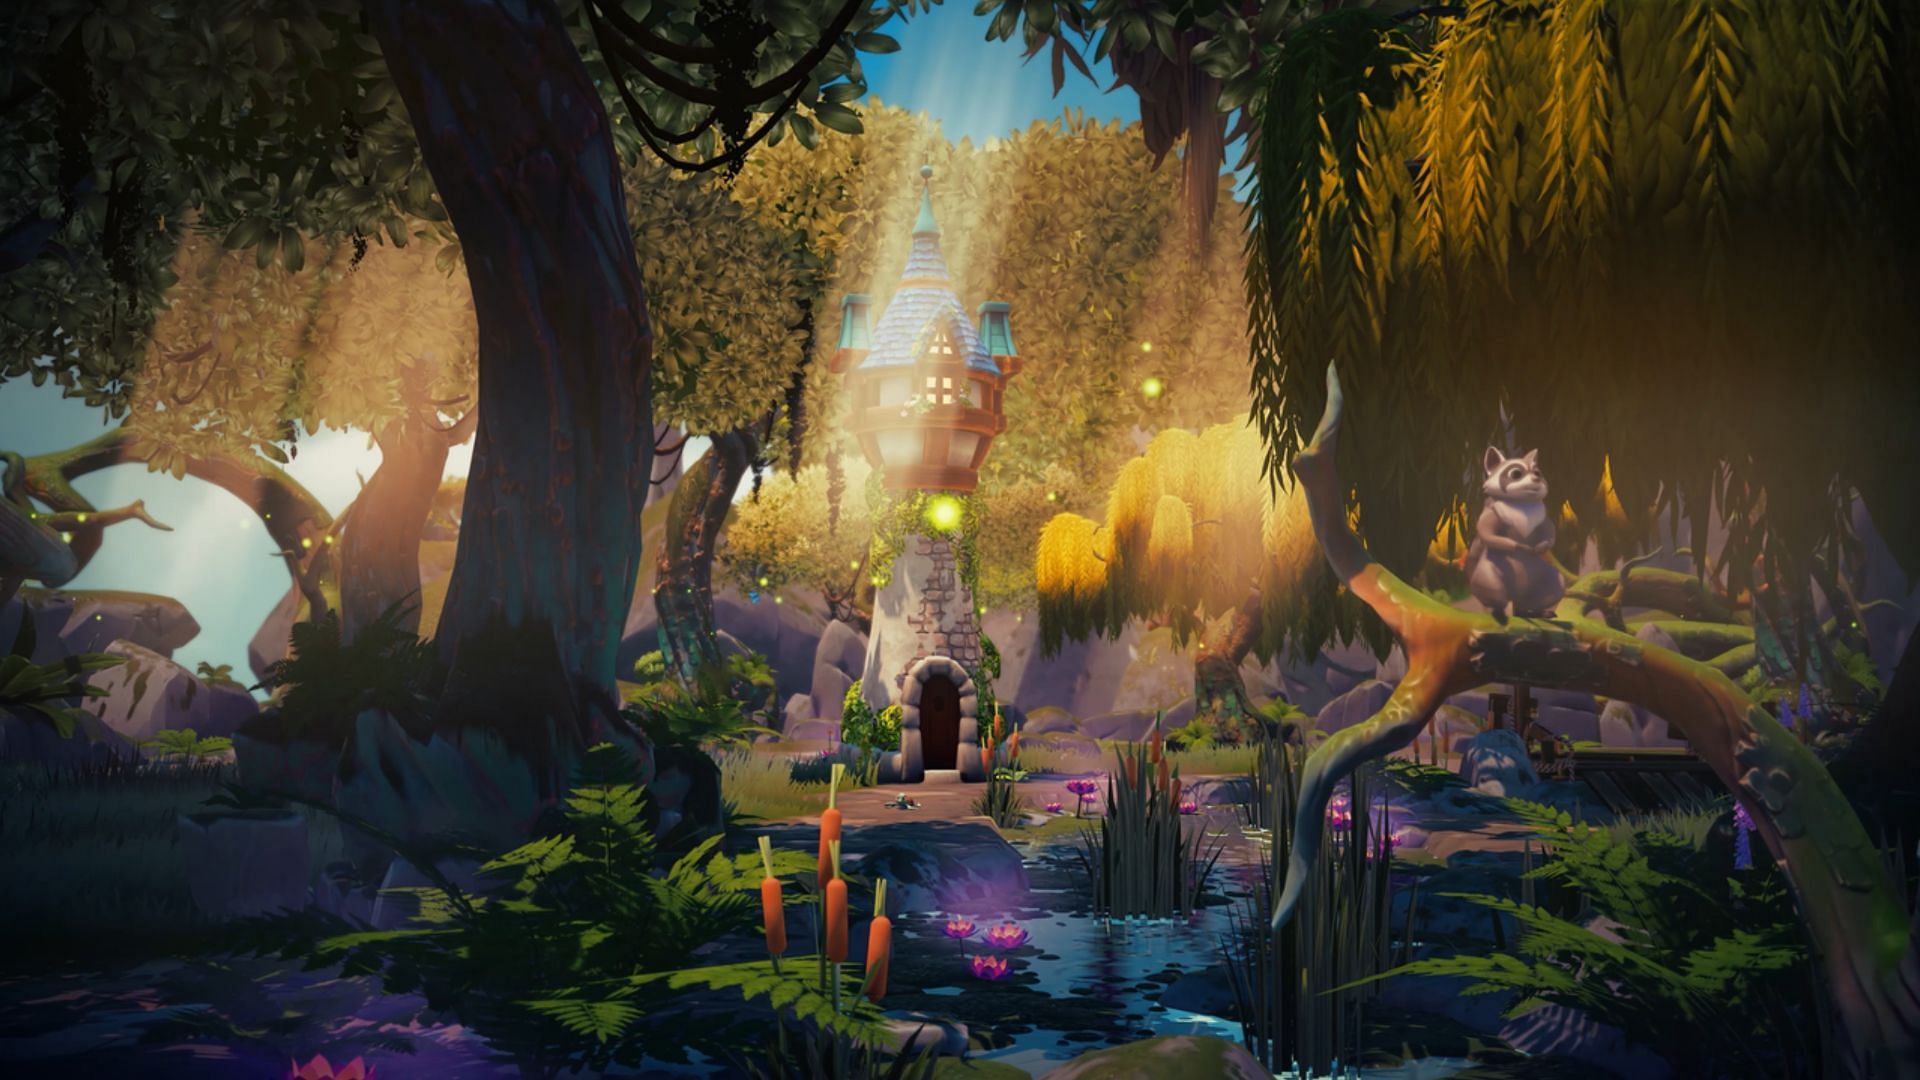 The Glade of Trust (Image via Gameloft)